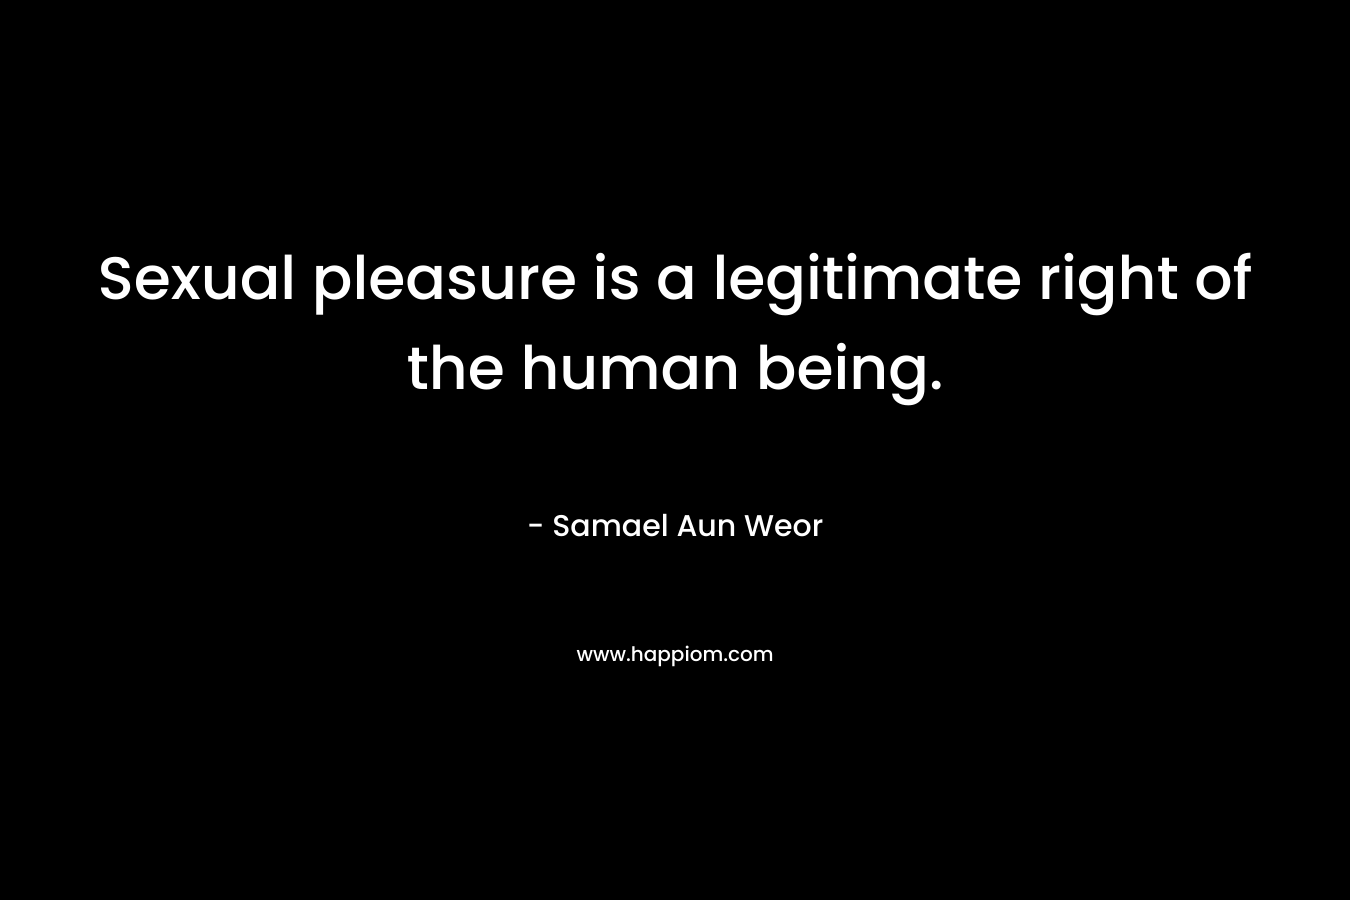 Sexual pleasure is a legitimate right of the human being. – Samael Aun Weor